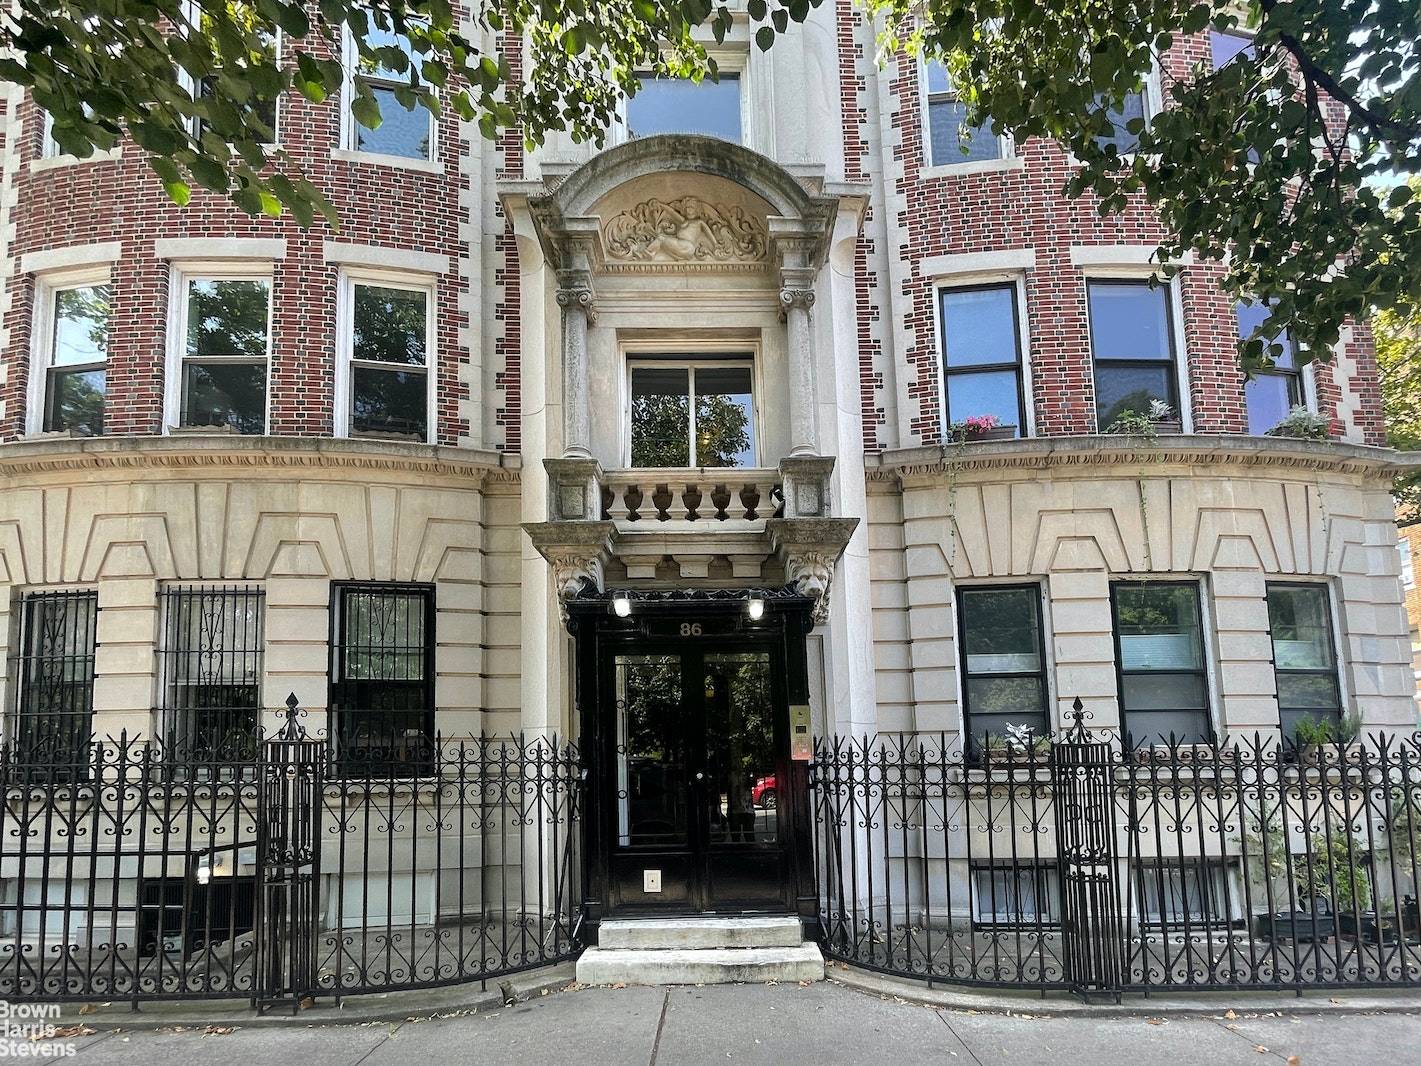 Look outside the windows and watch the gorgeous Litchfield Villa gardens change with the seasons from your sprawling Center Slope apartment in this 1908, French Beaux Arts Style building.